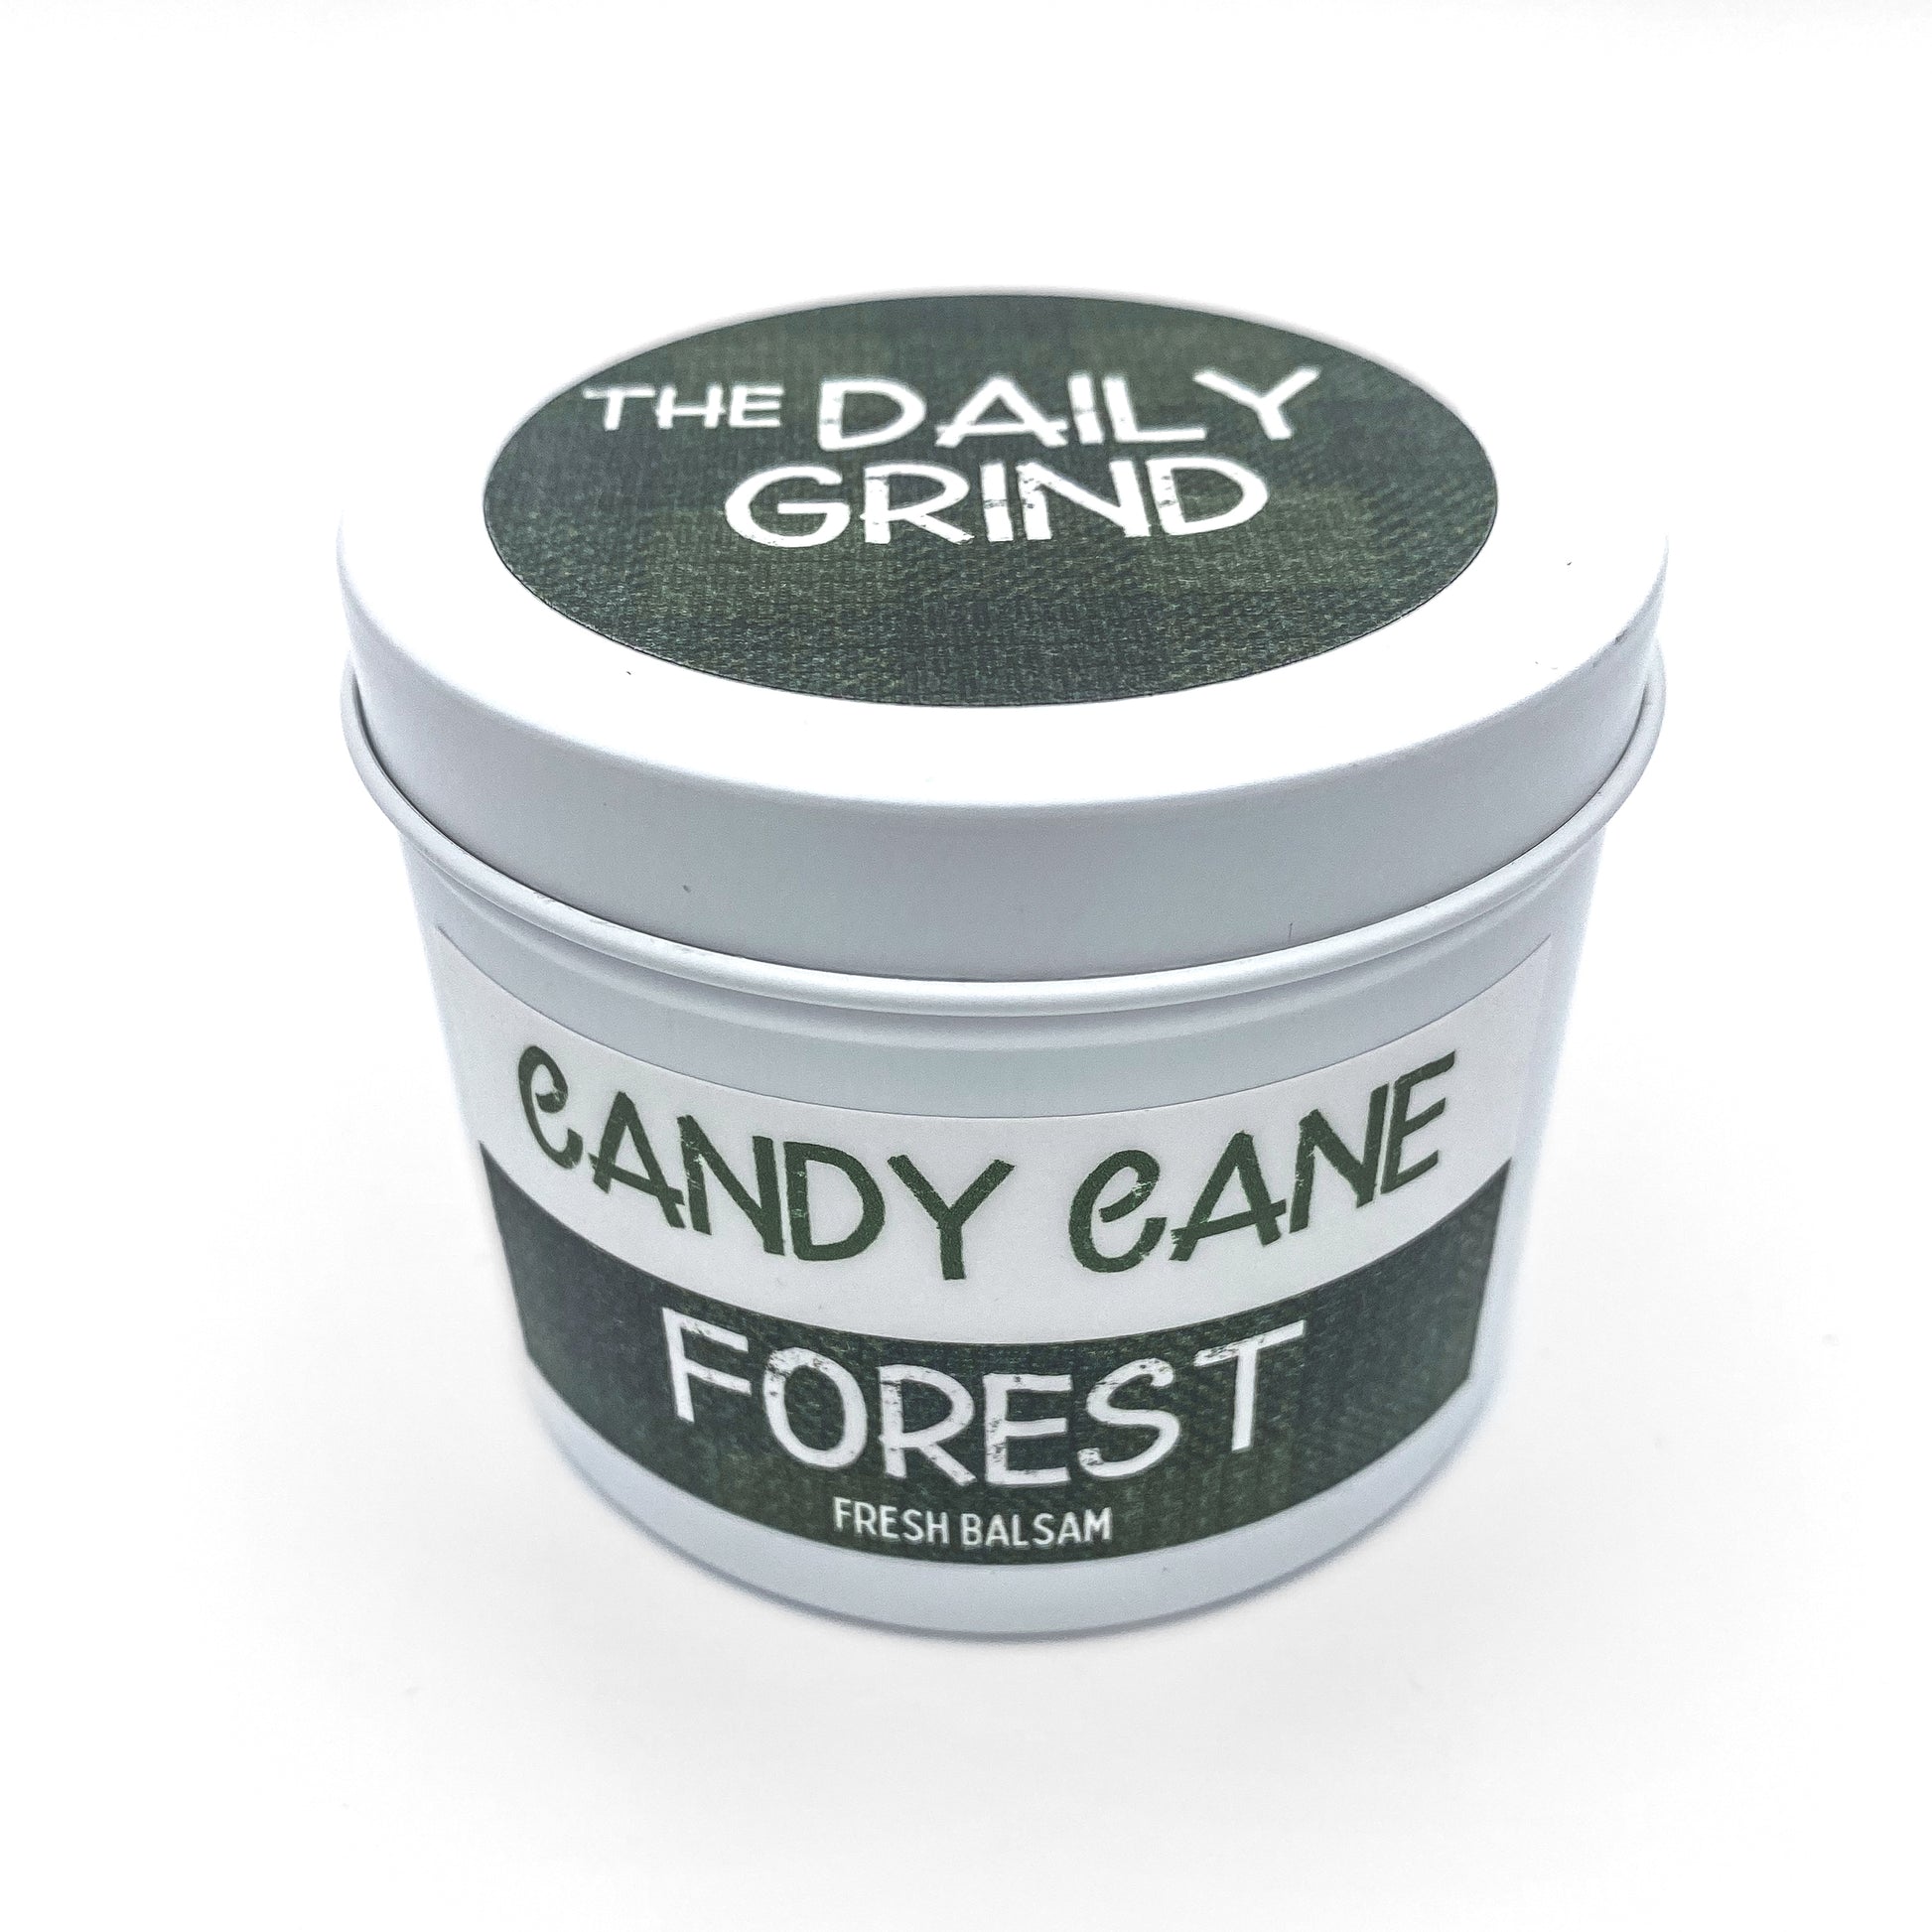 "Candy Cane Forest" holiday candle in decorative white tin